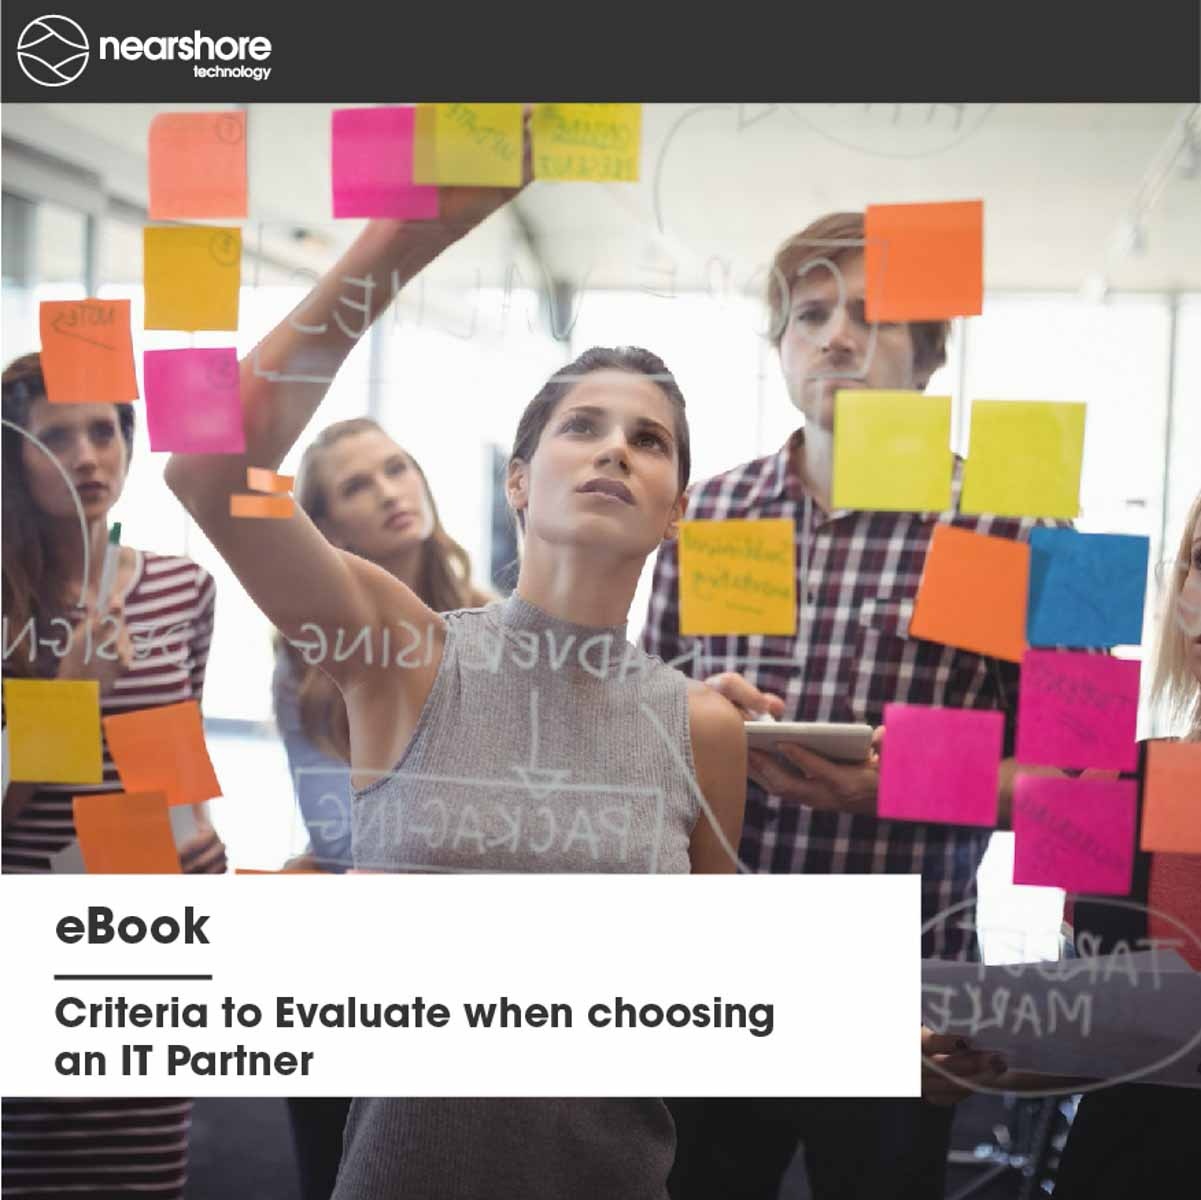 eBook: Criteria to Evaluate when Choosing an IT Partner